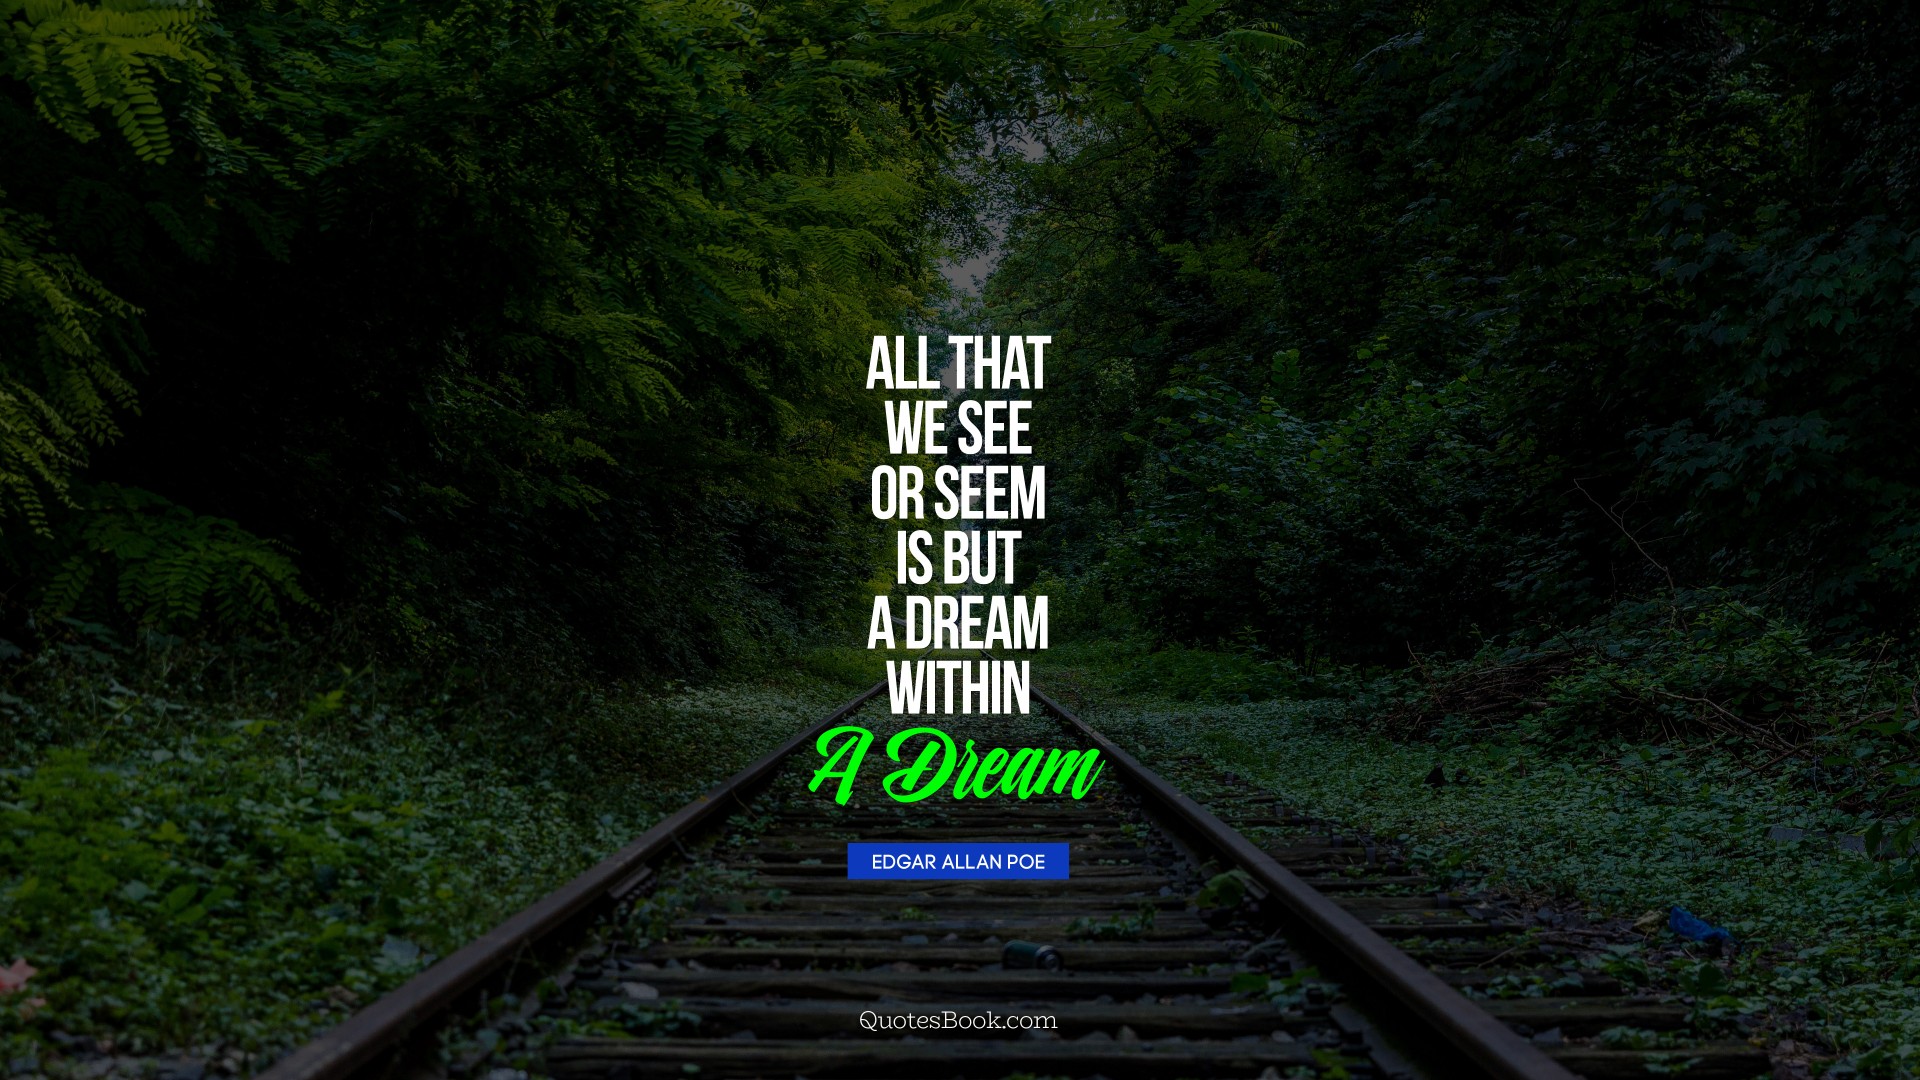 All that we see or seem is but a dream within a dream.. - Quote by Edgar Allan Poe